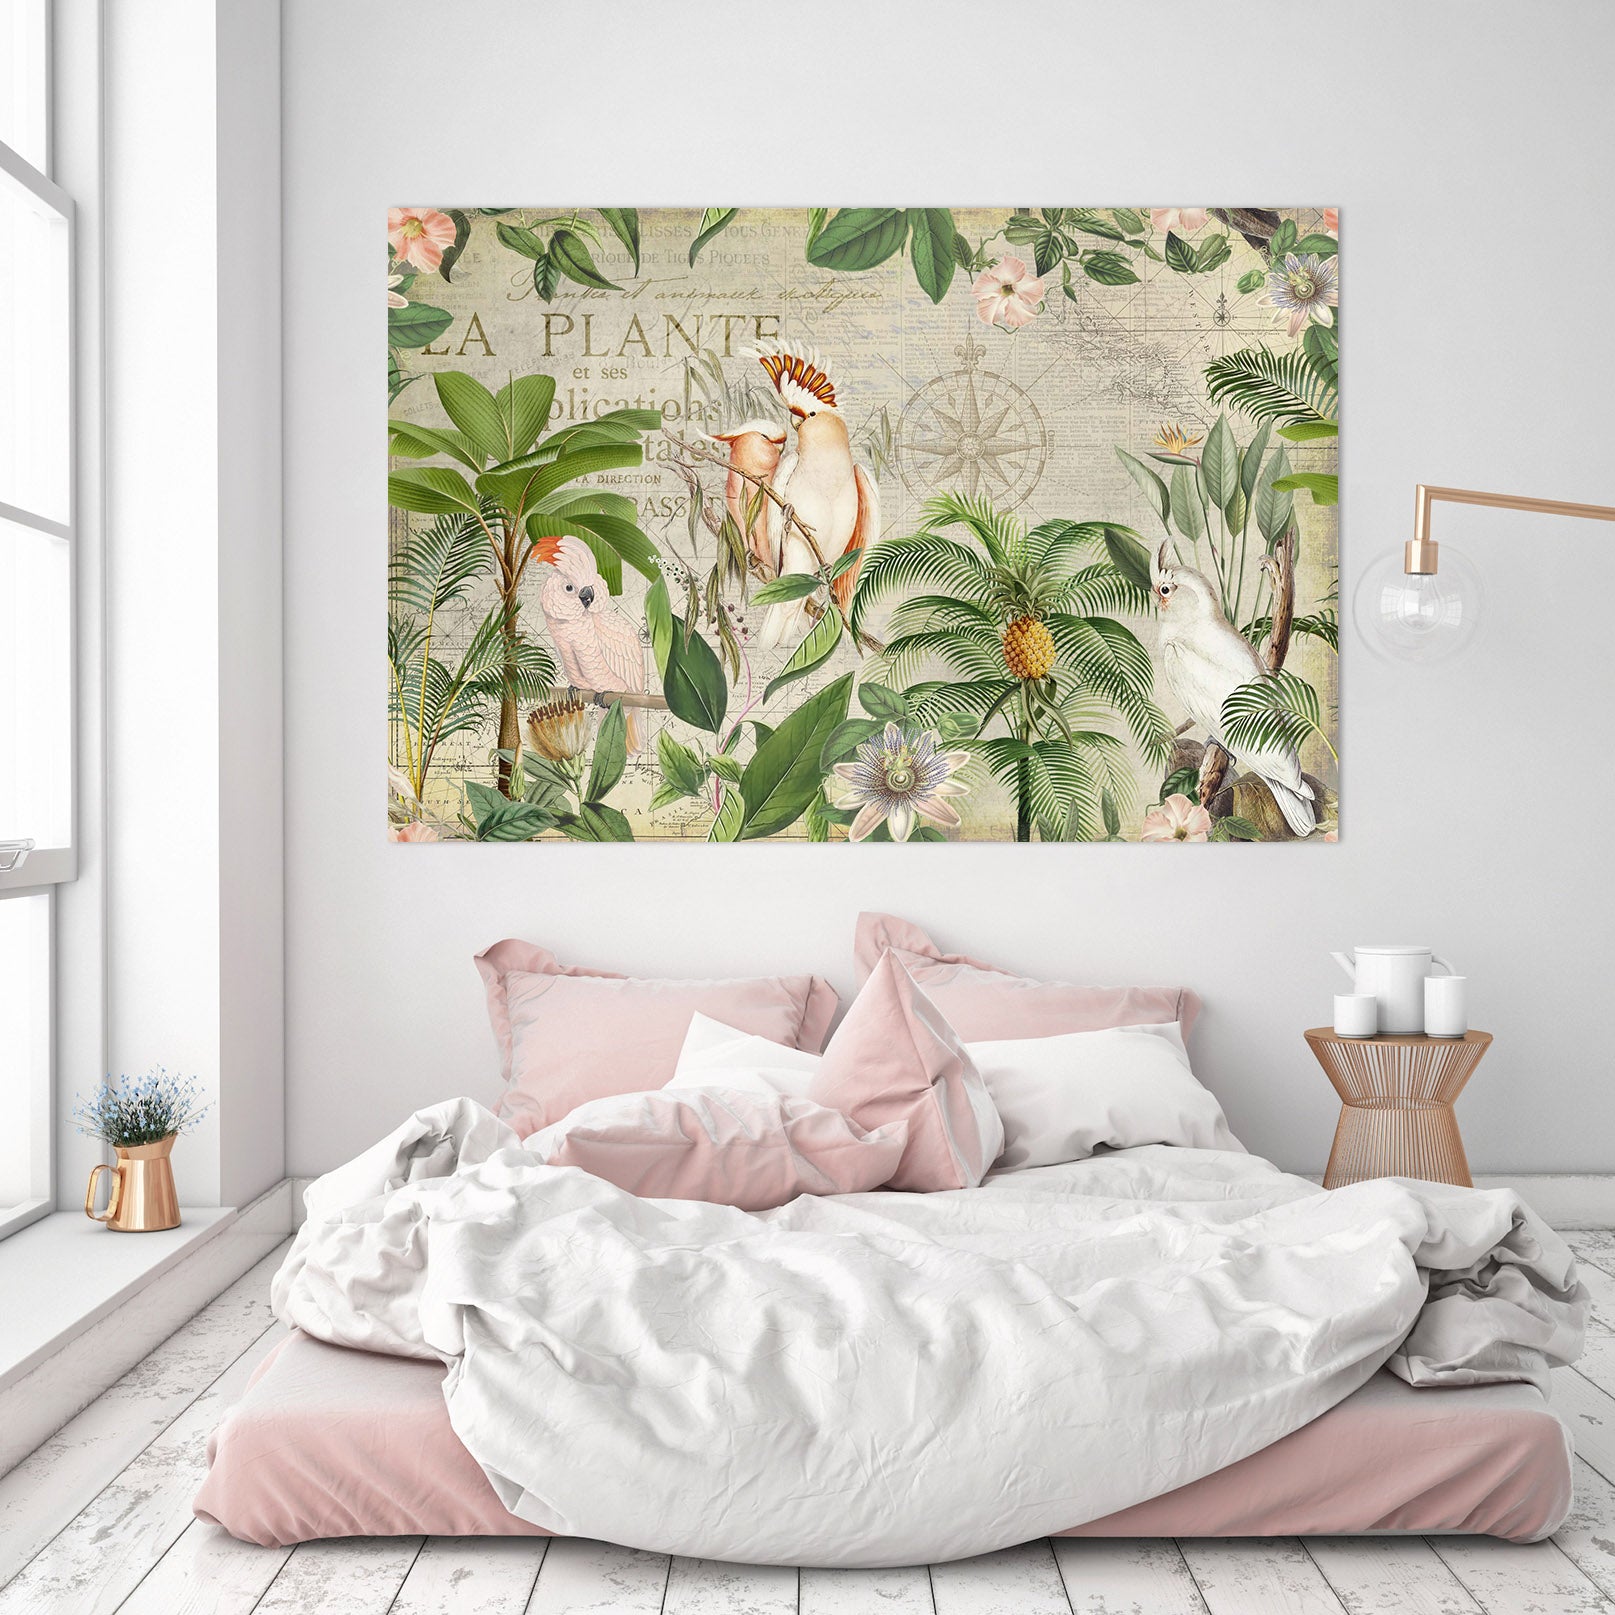 3D Forest Parrot 045 Andrea haase Wall Sticker